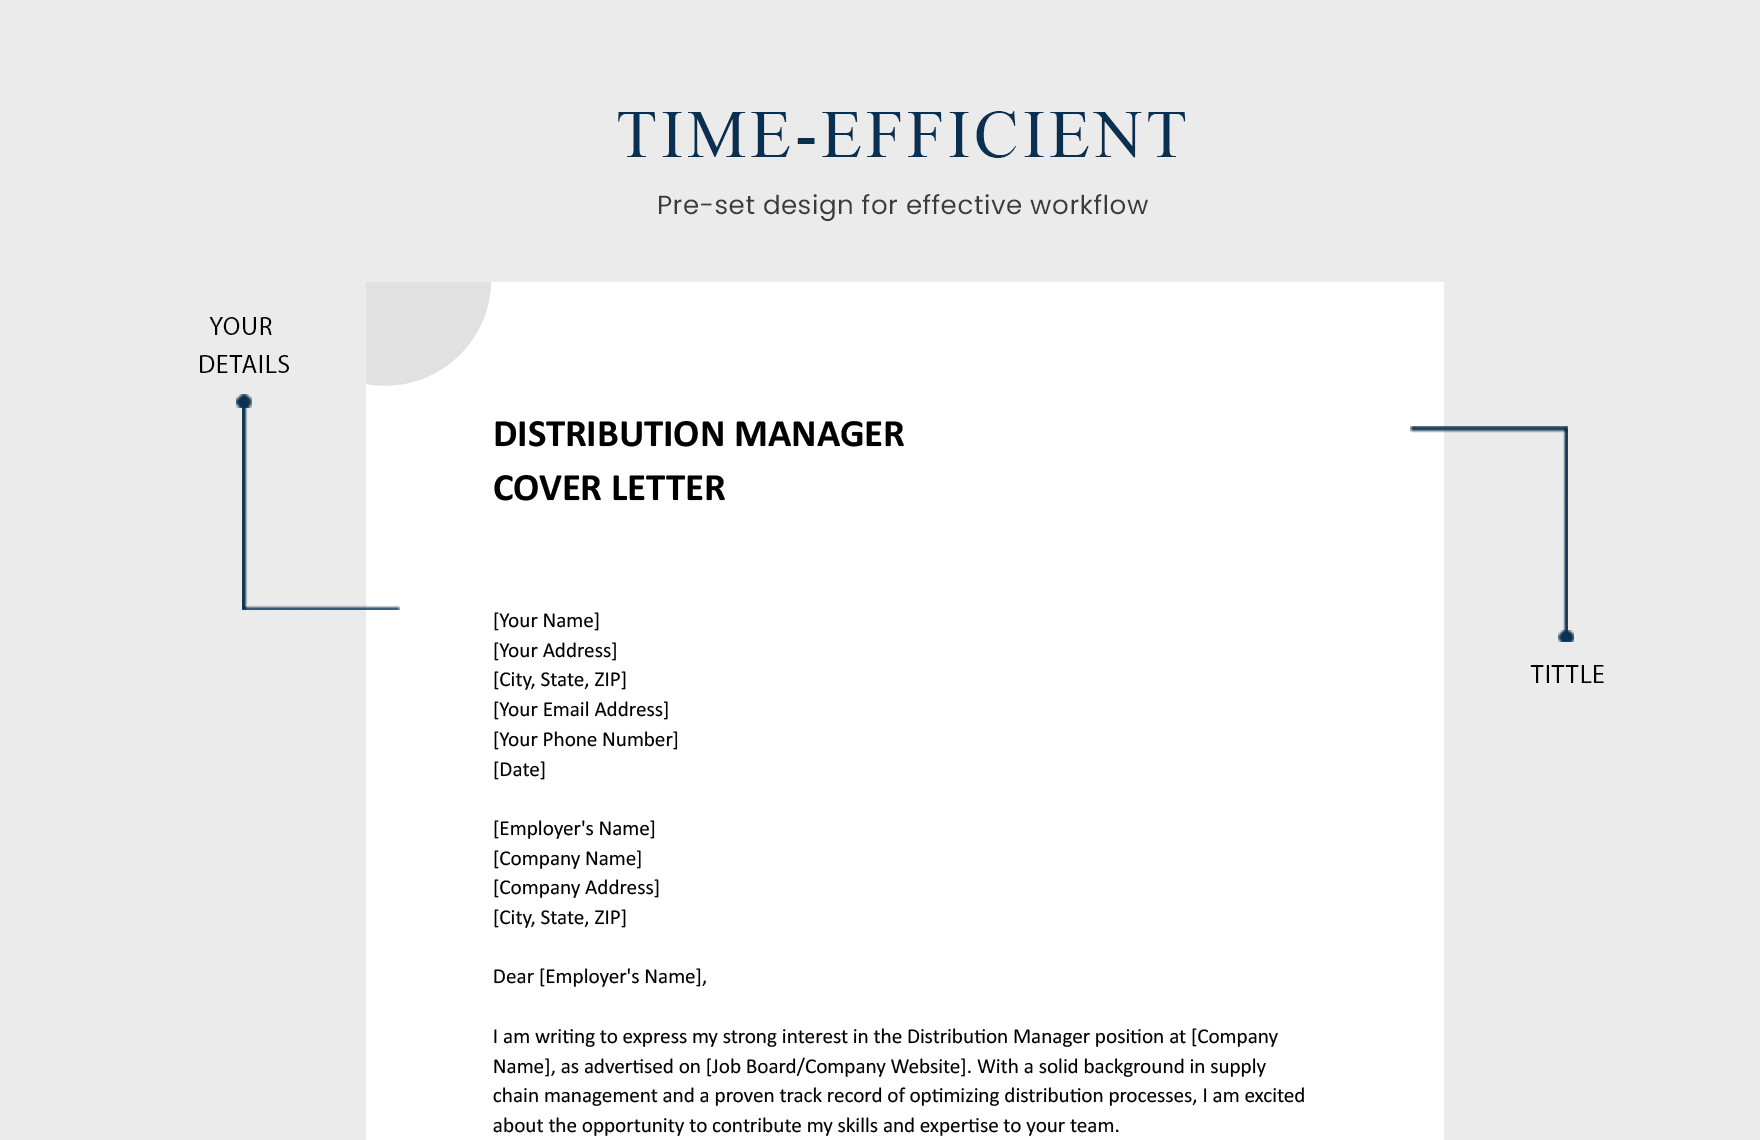 Distribution Manager Cover Letter